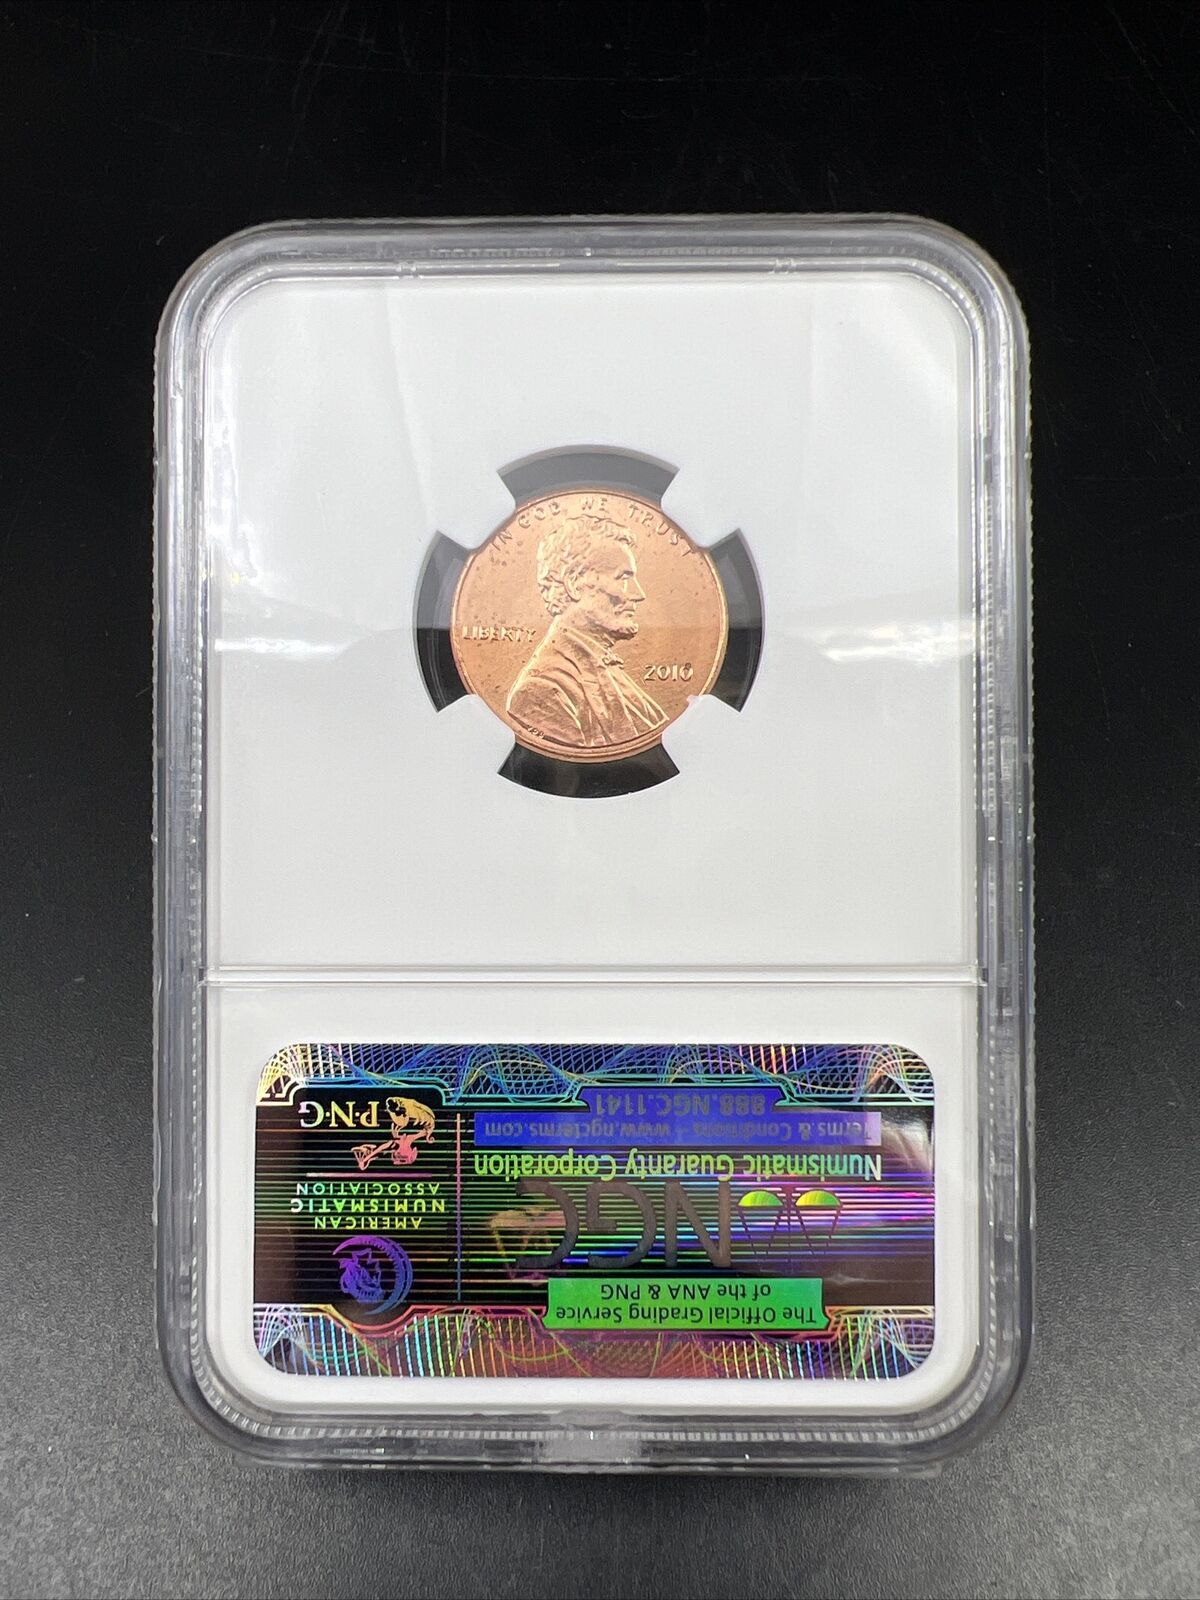 2010 Union Shield 1c Lincoln Cent NGC Certified BU First Day Issue Sample Slab